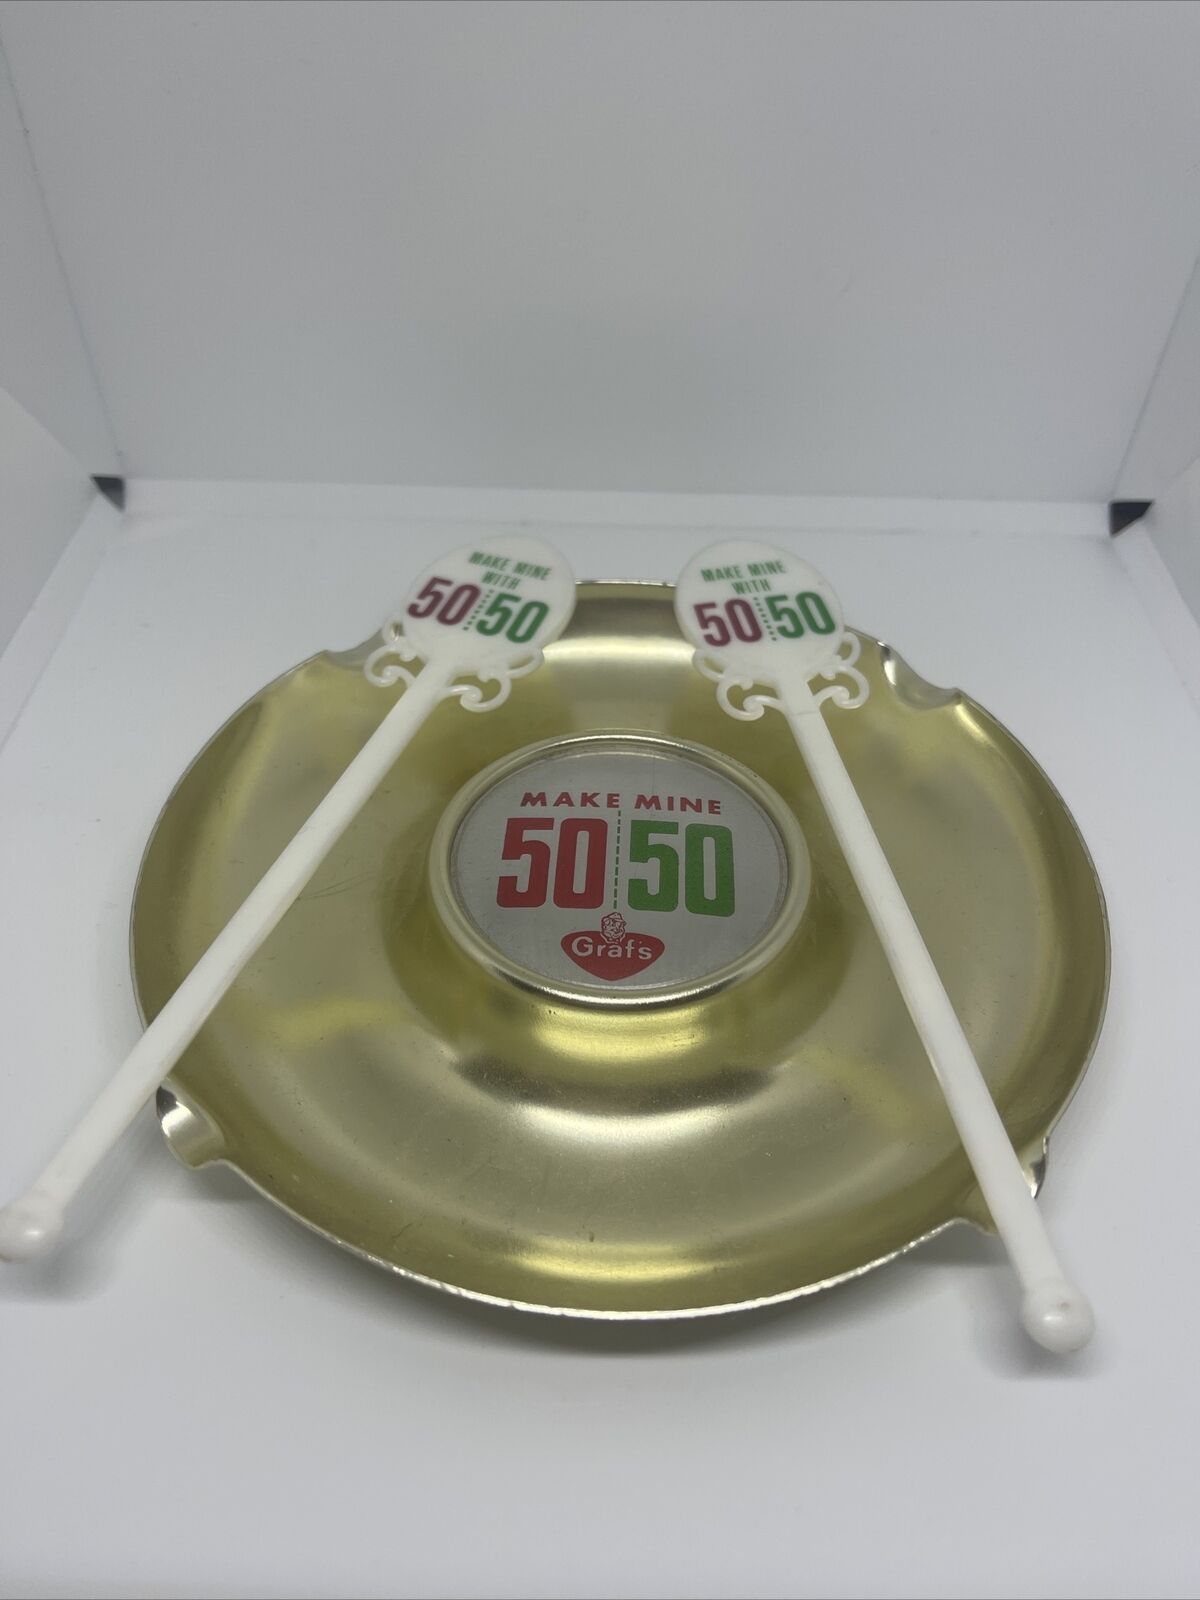 Vintage Grafs 50/50 Ashtray Italy Gold Color Metal 5 3/8” With 2 Stir Sticks